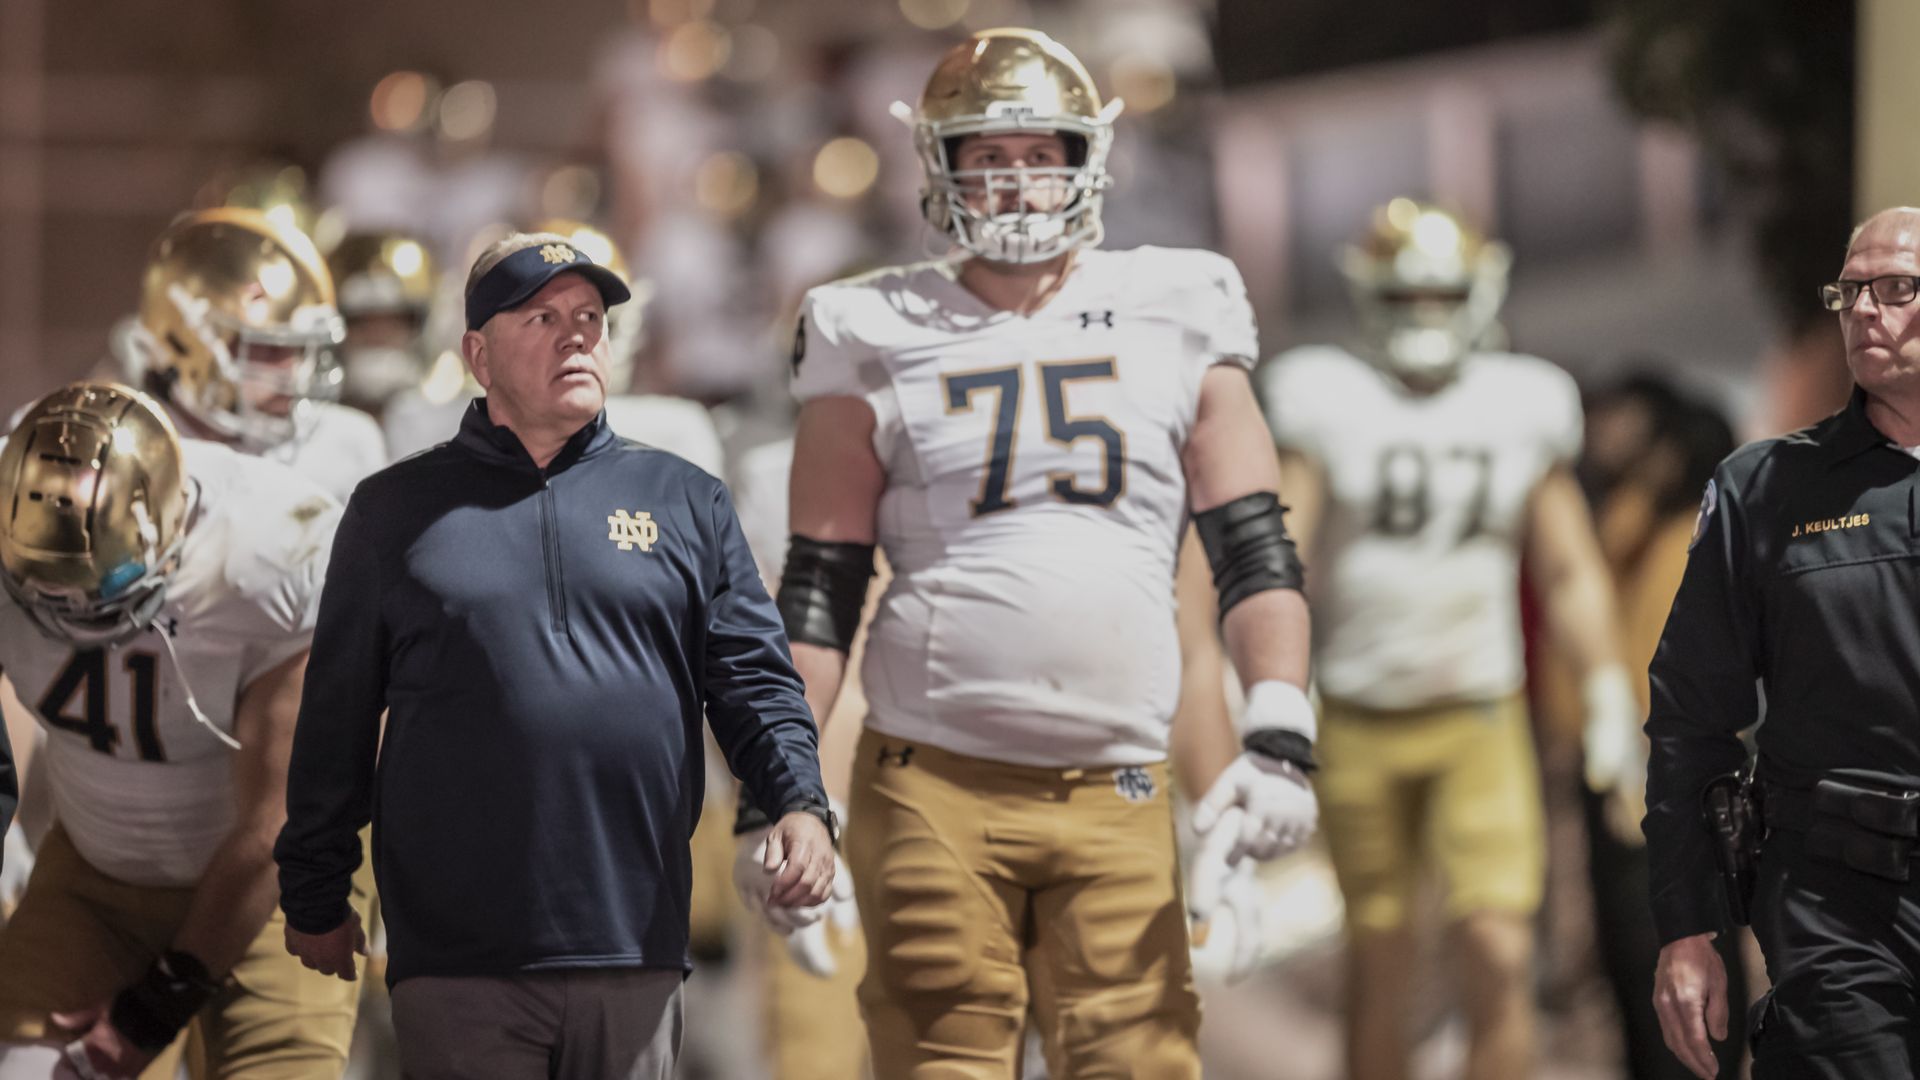 Former Notre Dame football coach Brian Kelly walks in front of his players